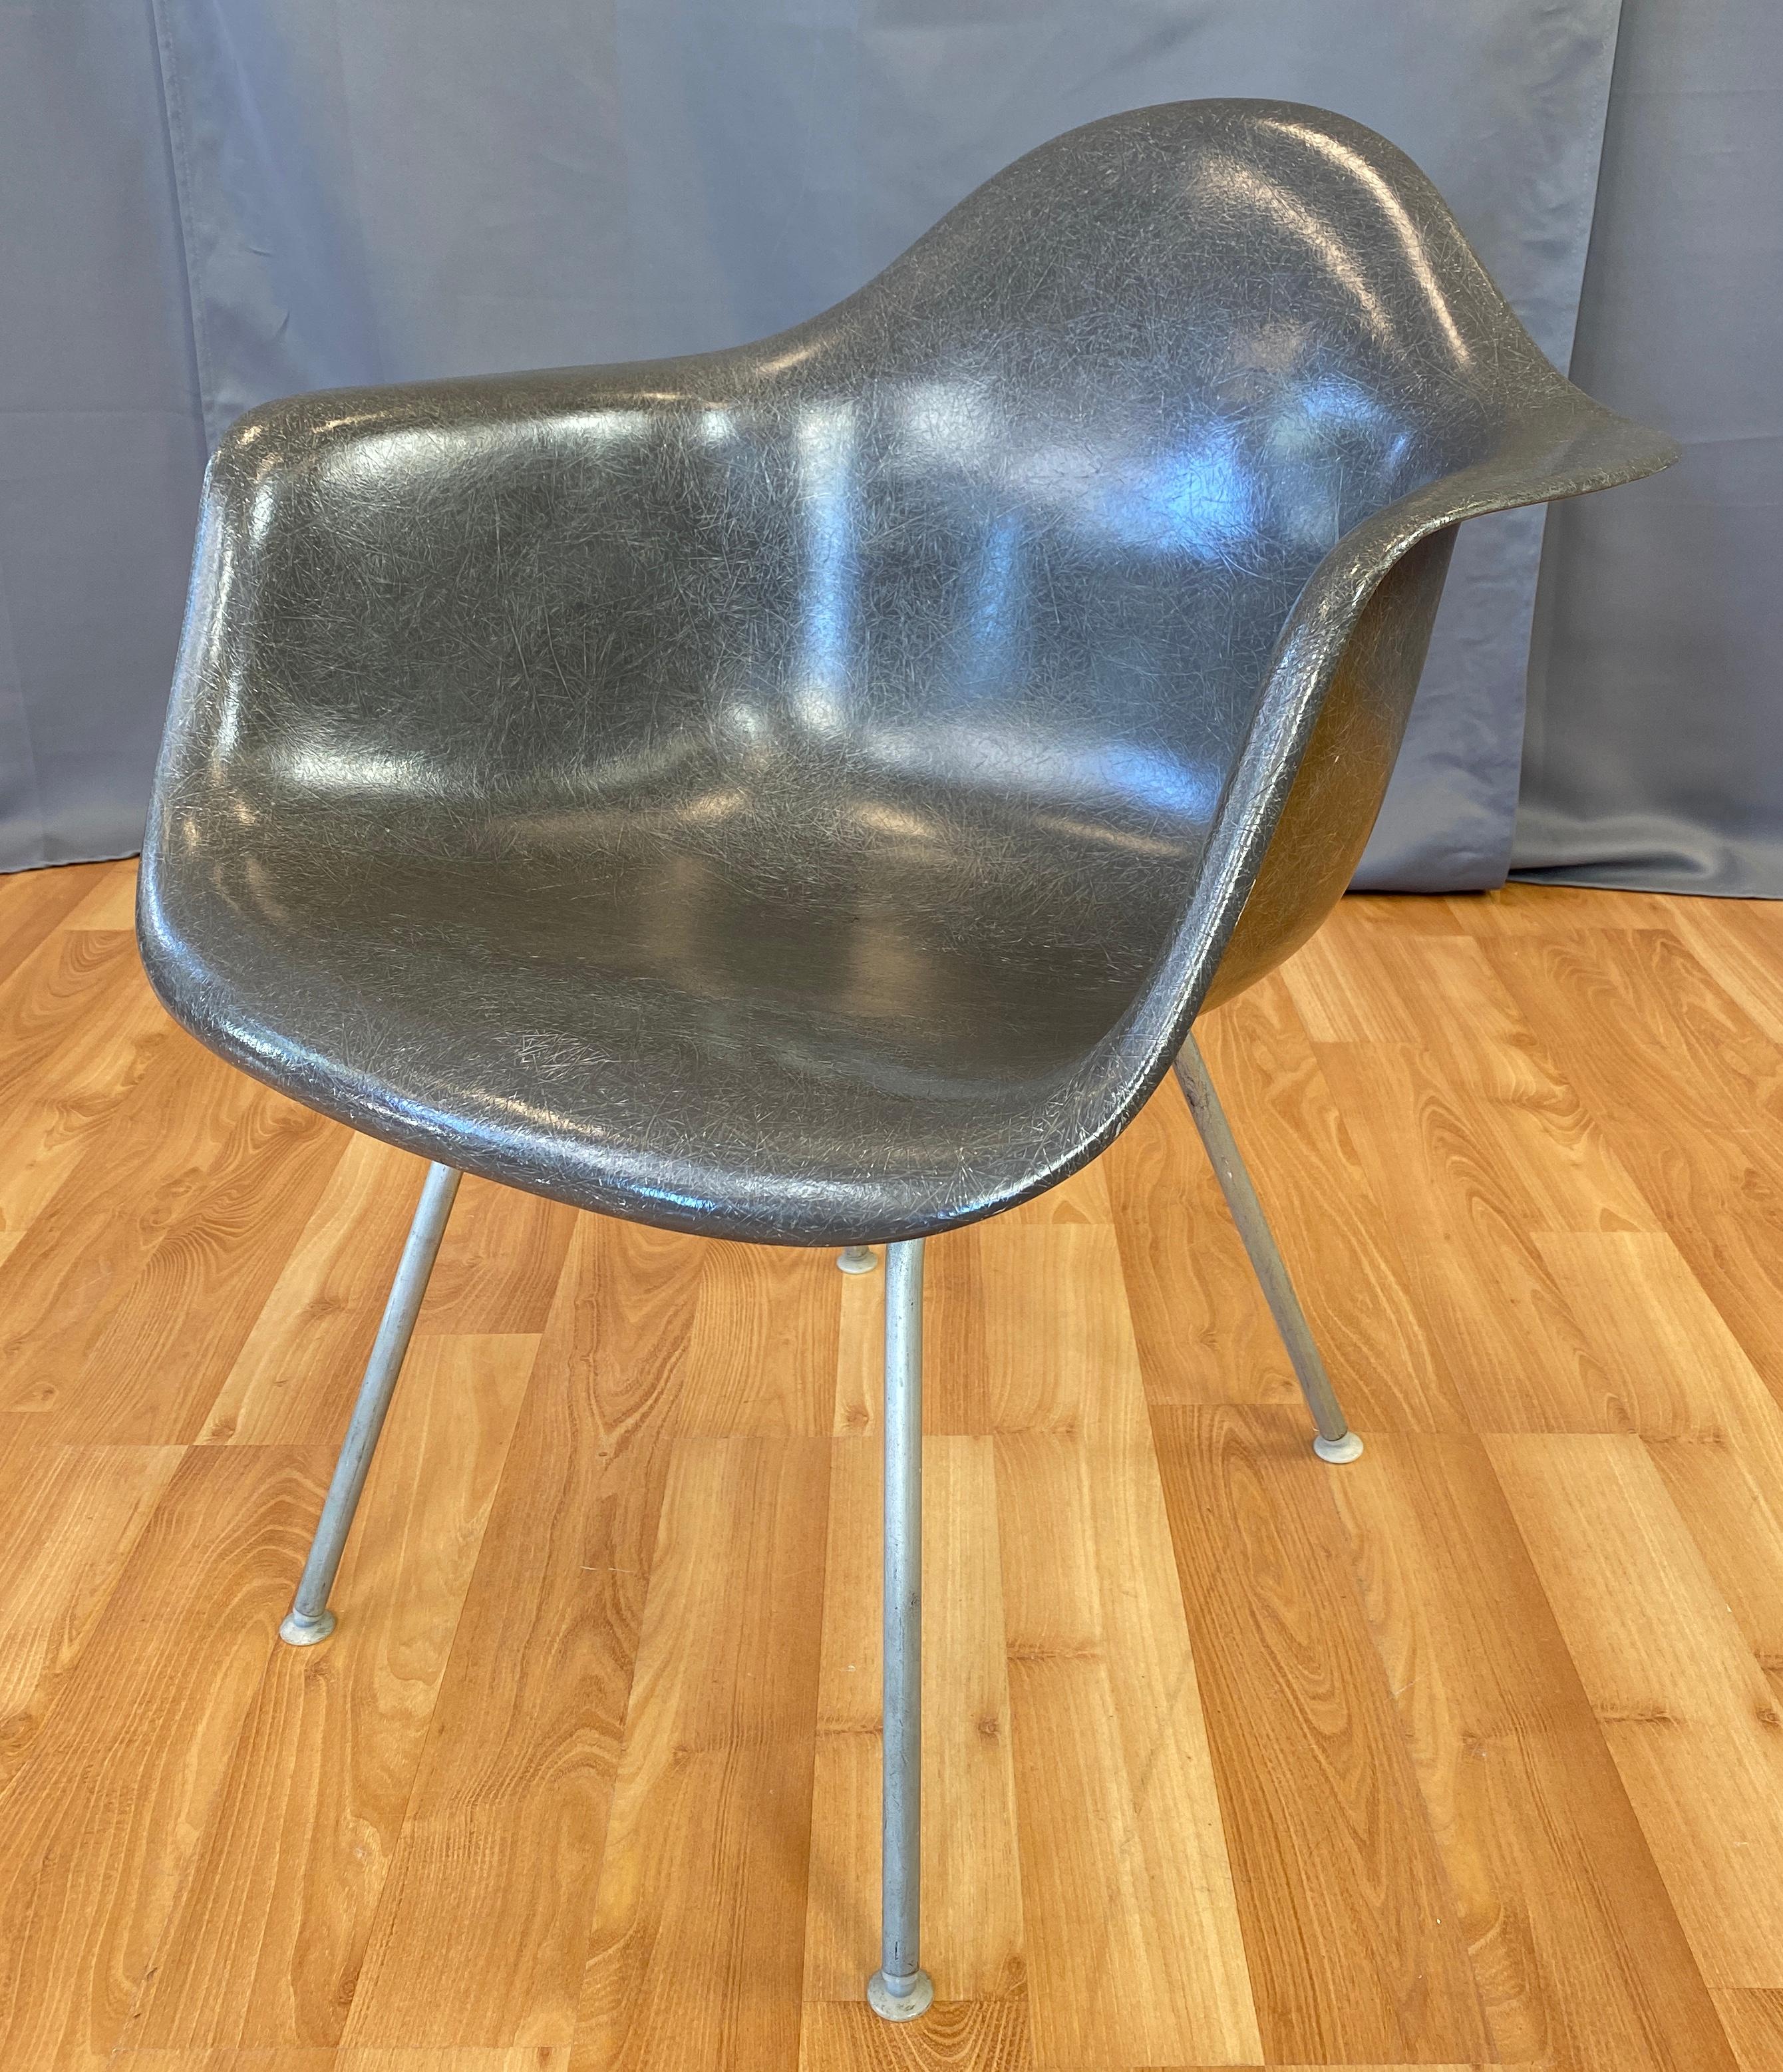 A circa 1960s Charles Eames fiberglass shell armchair for Herman Miller, in a elephant hide gray color.